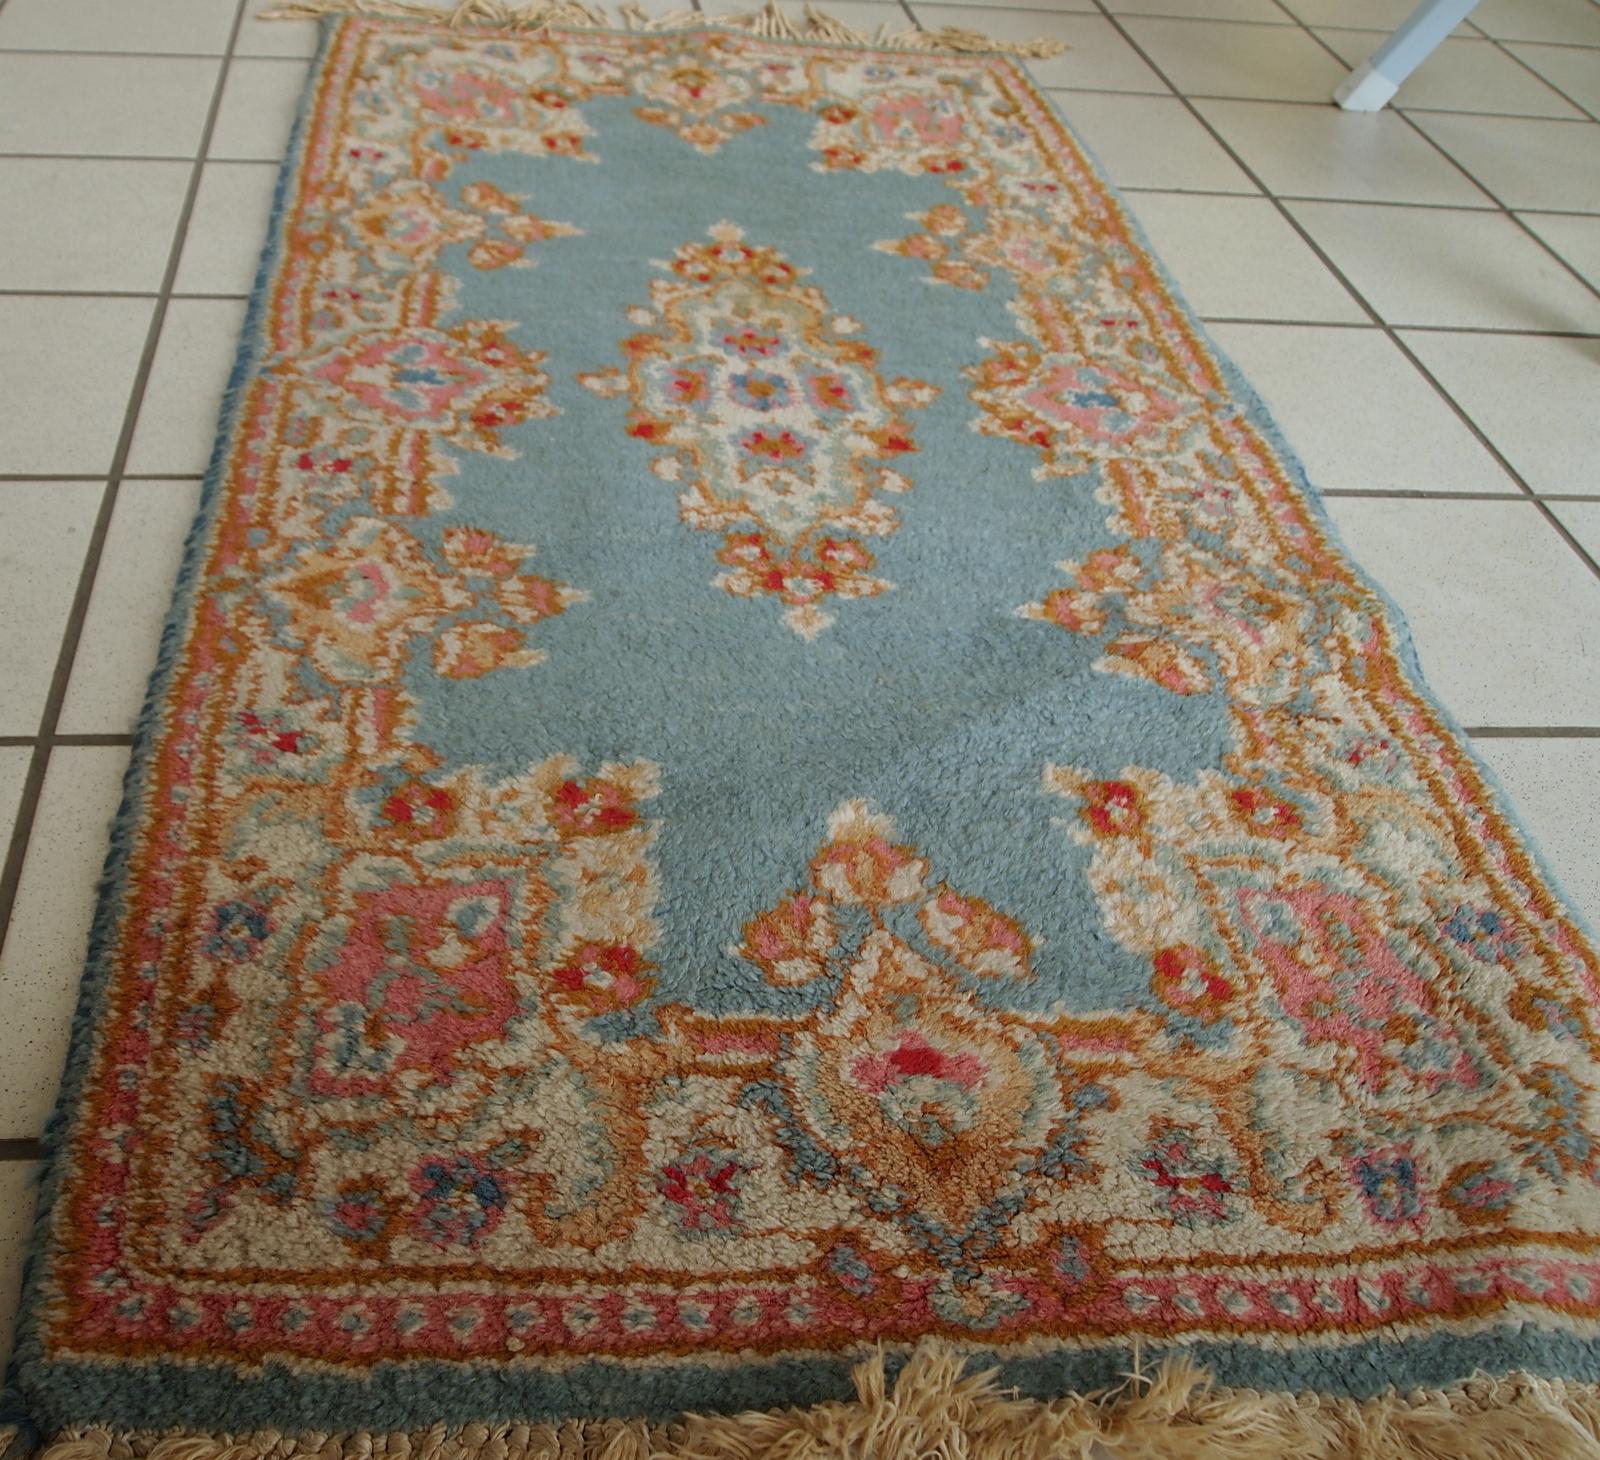 Handmade vintage rug from Middle East in sky blue color. It is in original good condition from the end of 20th century.

- Condition: original good,

- circa 1970s,

- Size: 1.9' x 3.8' (60cm x 117cm),

- Material: Wool,

- Country of